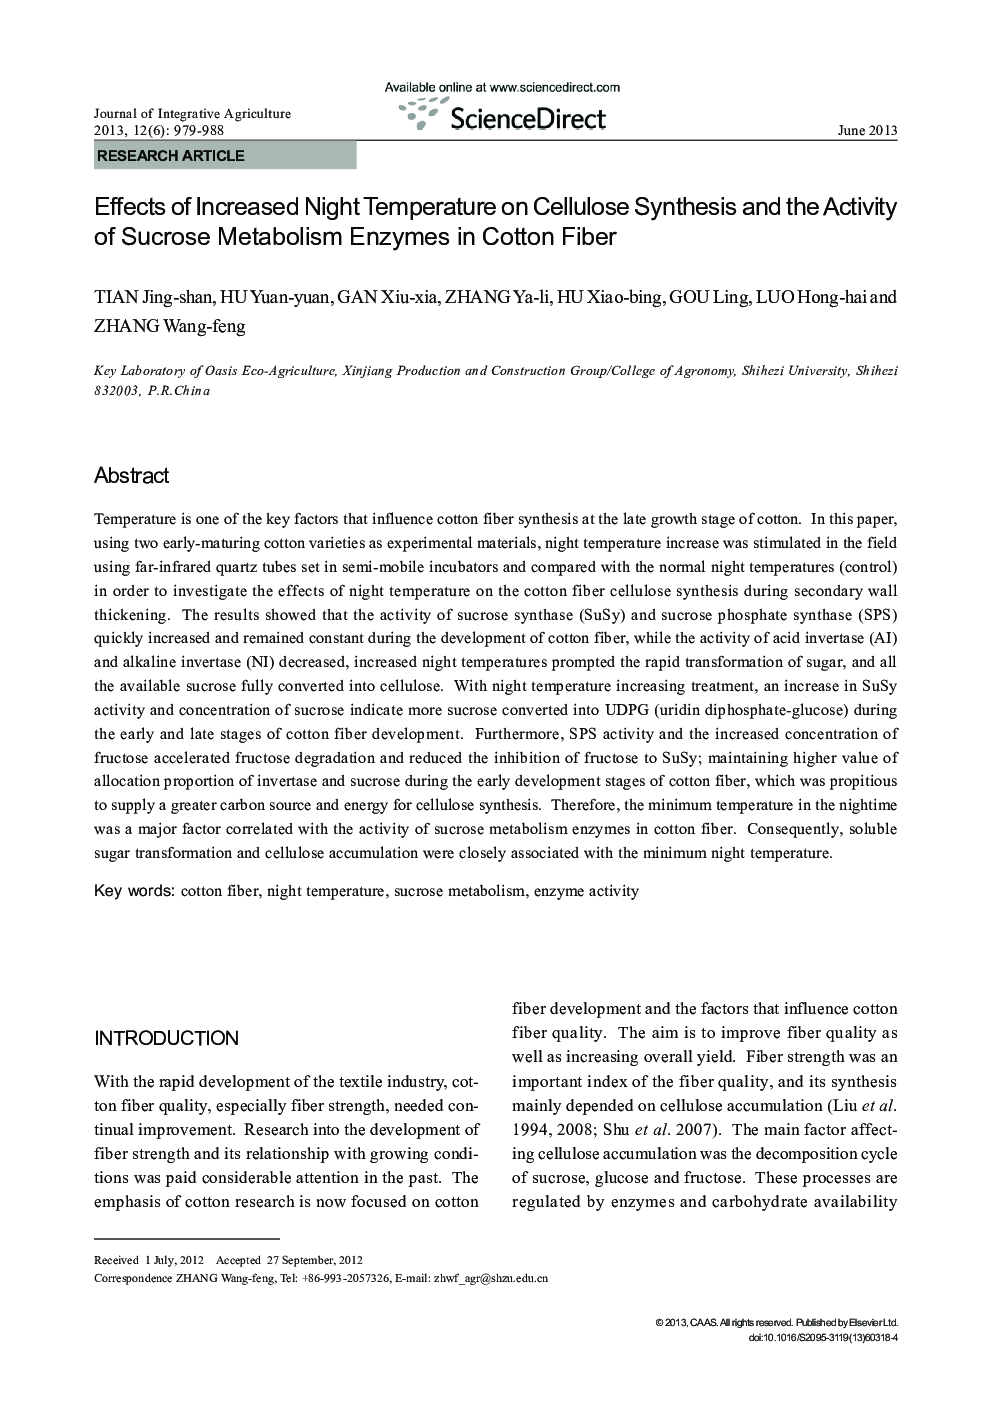 Effects of Increased Night Temperature on Cellulose Synthesis and the Activity of Sucrose Metabolism Enzymes in Cotton Fiber